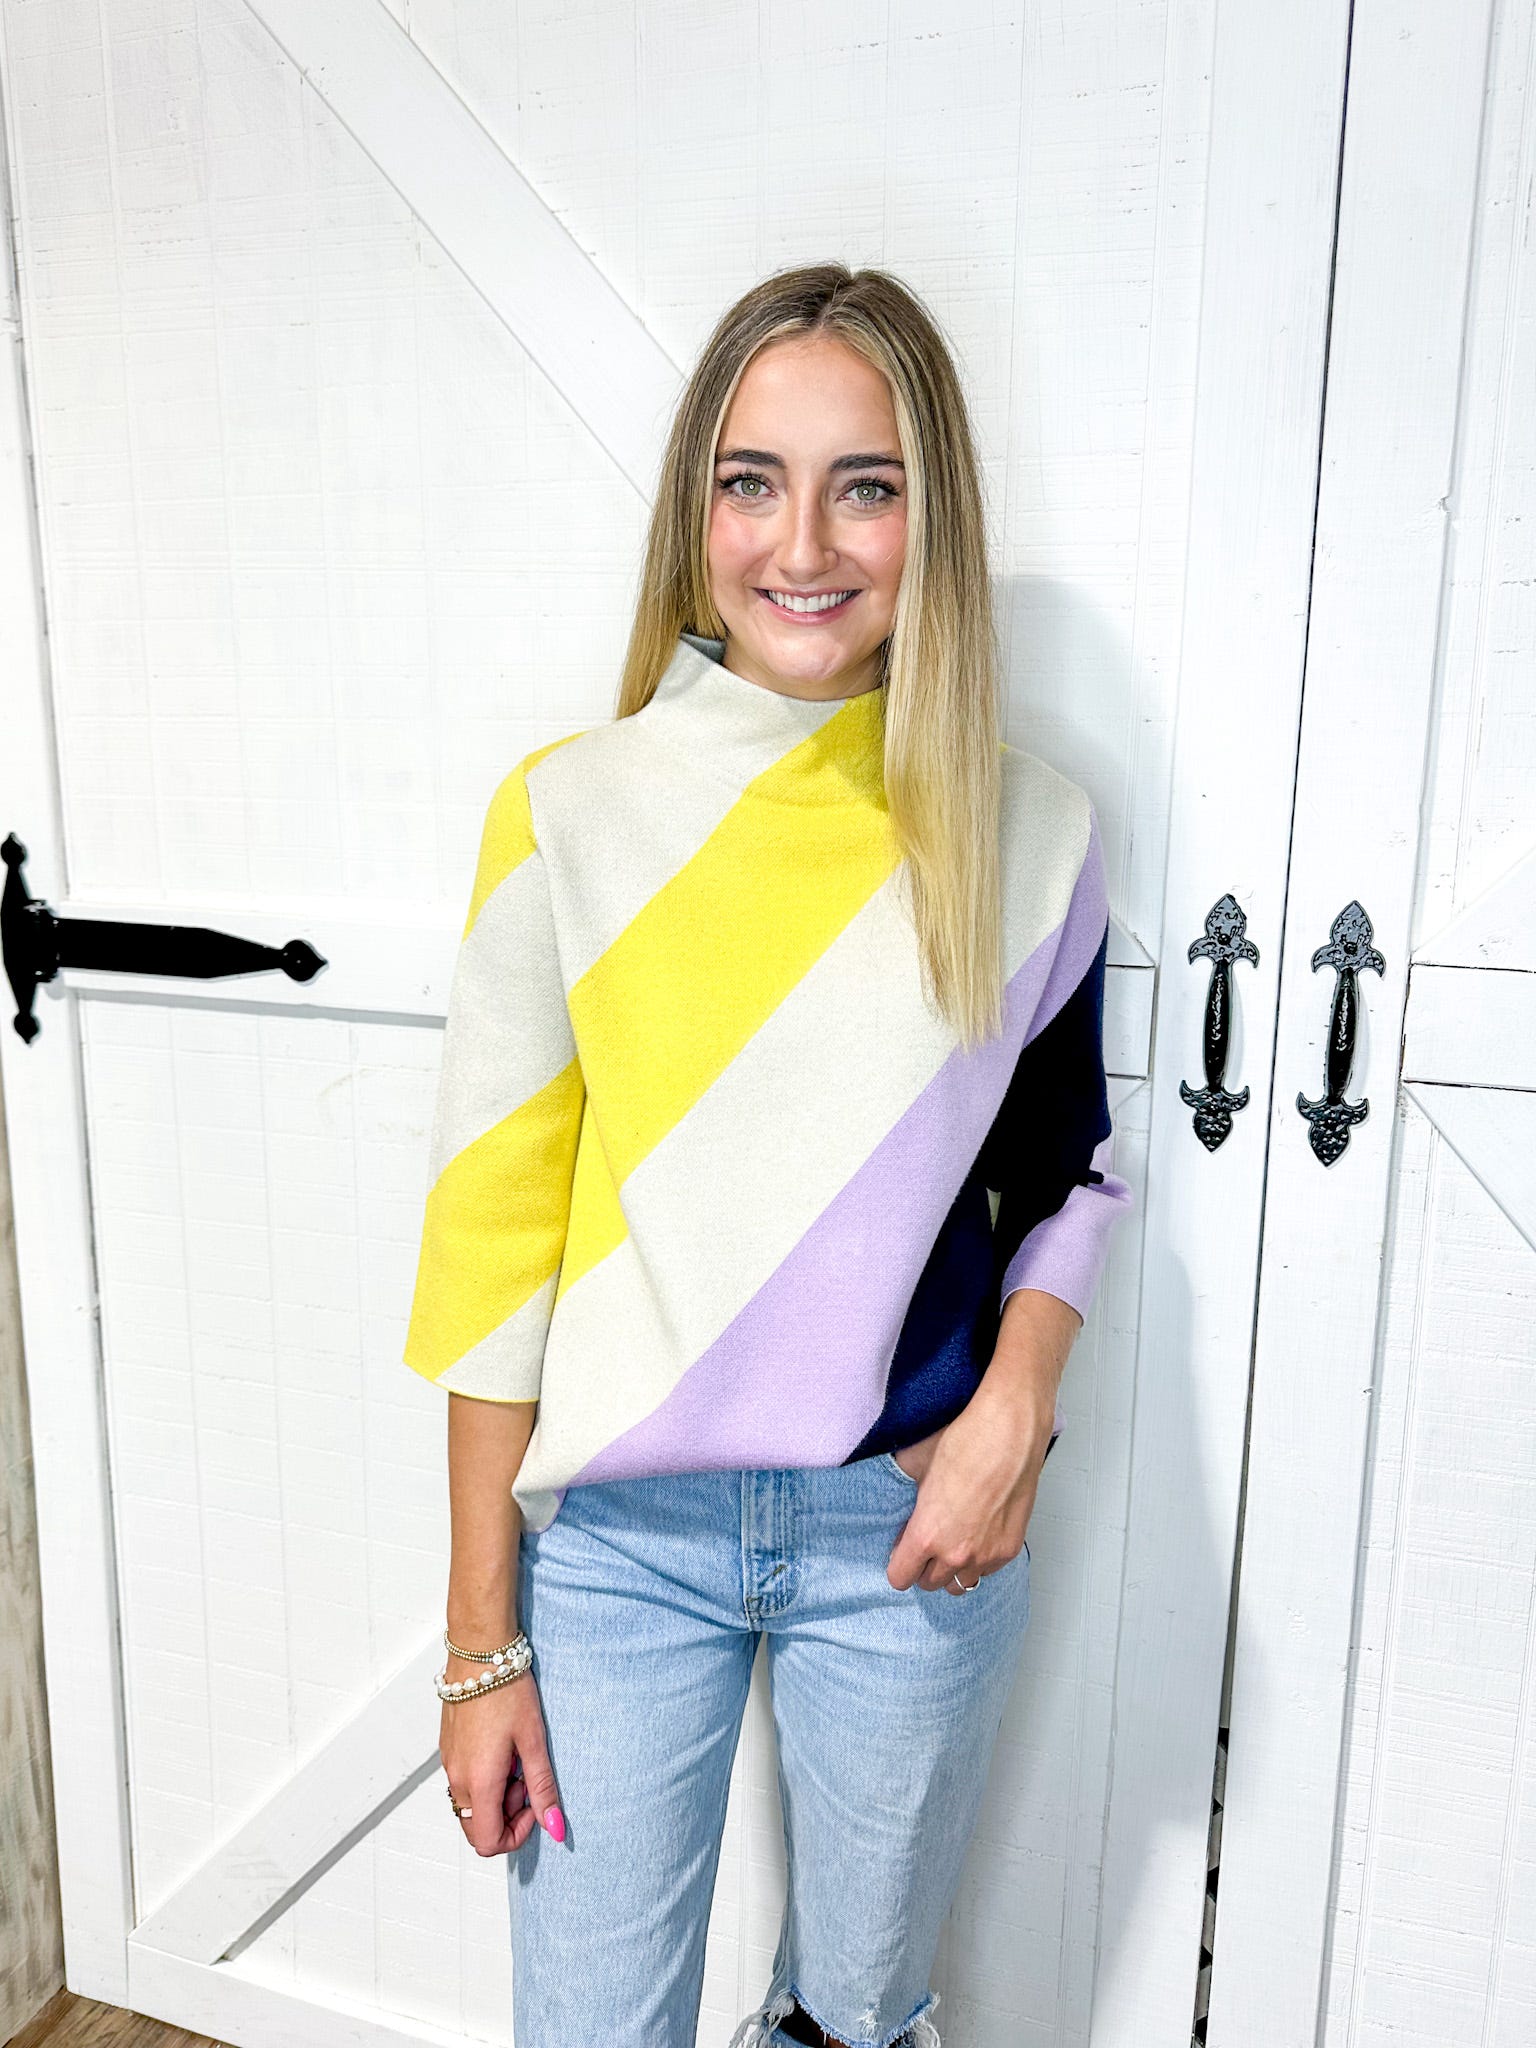 Woman modeling a mock-neck sweater with three quarter sleeves that has thick diagonal stripes in cream, yellow, lavender and navy